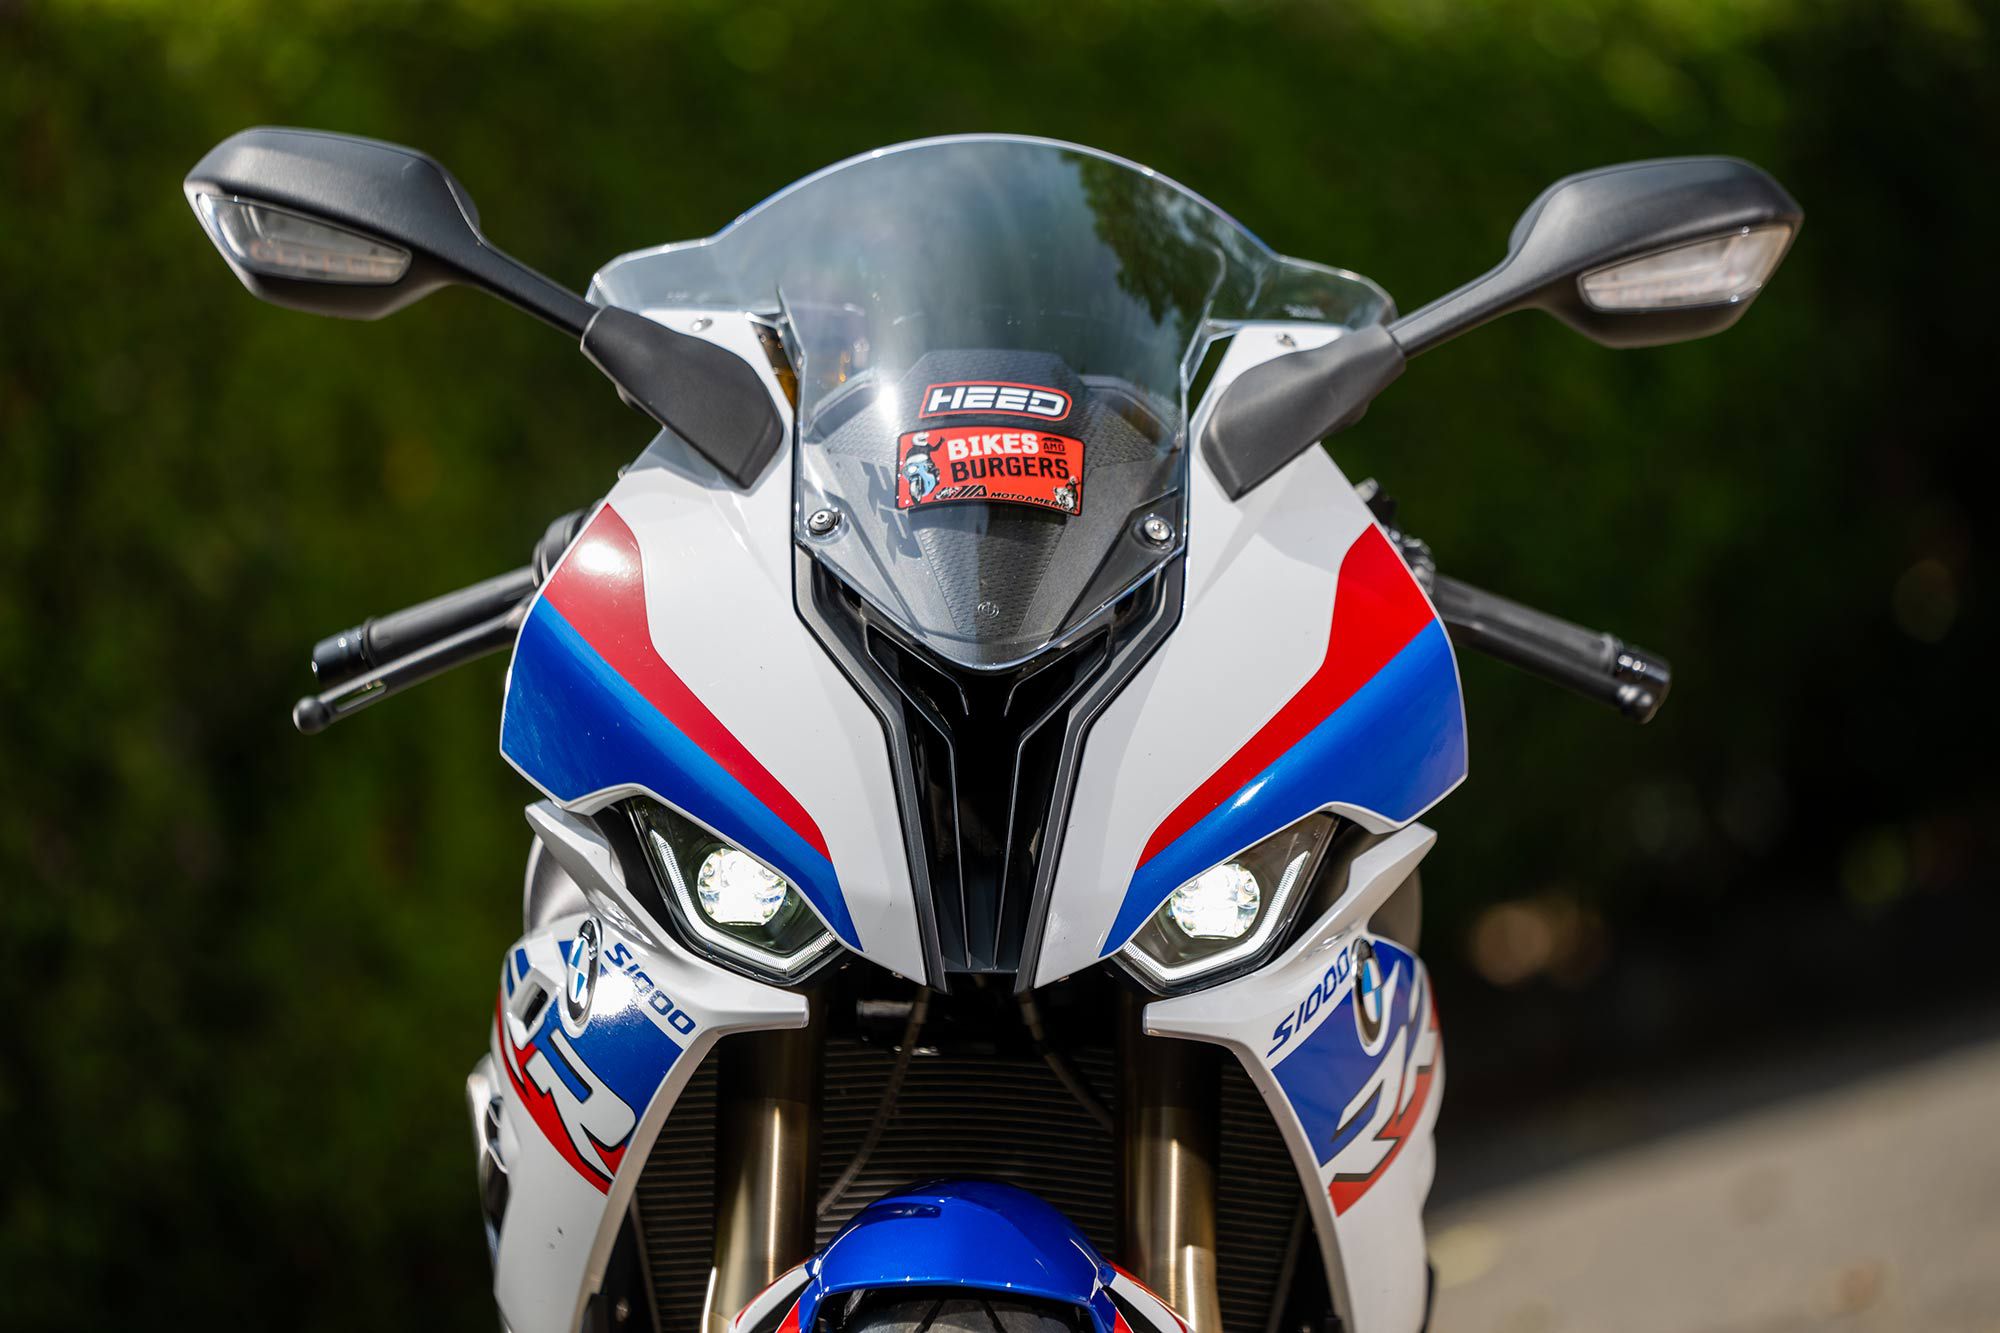 BMW’s S 1000 RR certainly looks the part of a fast superbike. We wish its windscreen was taller though.